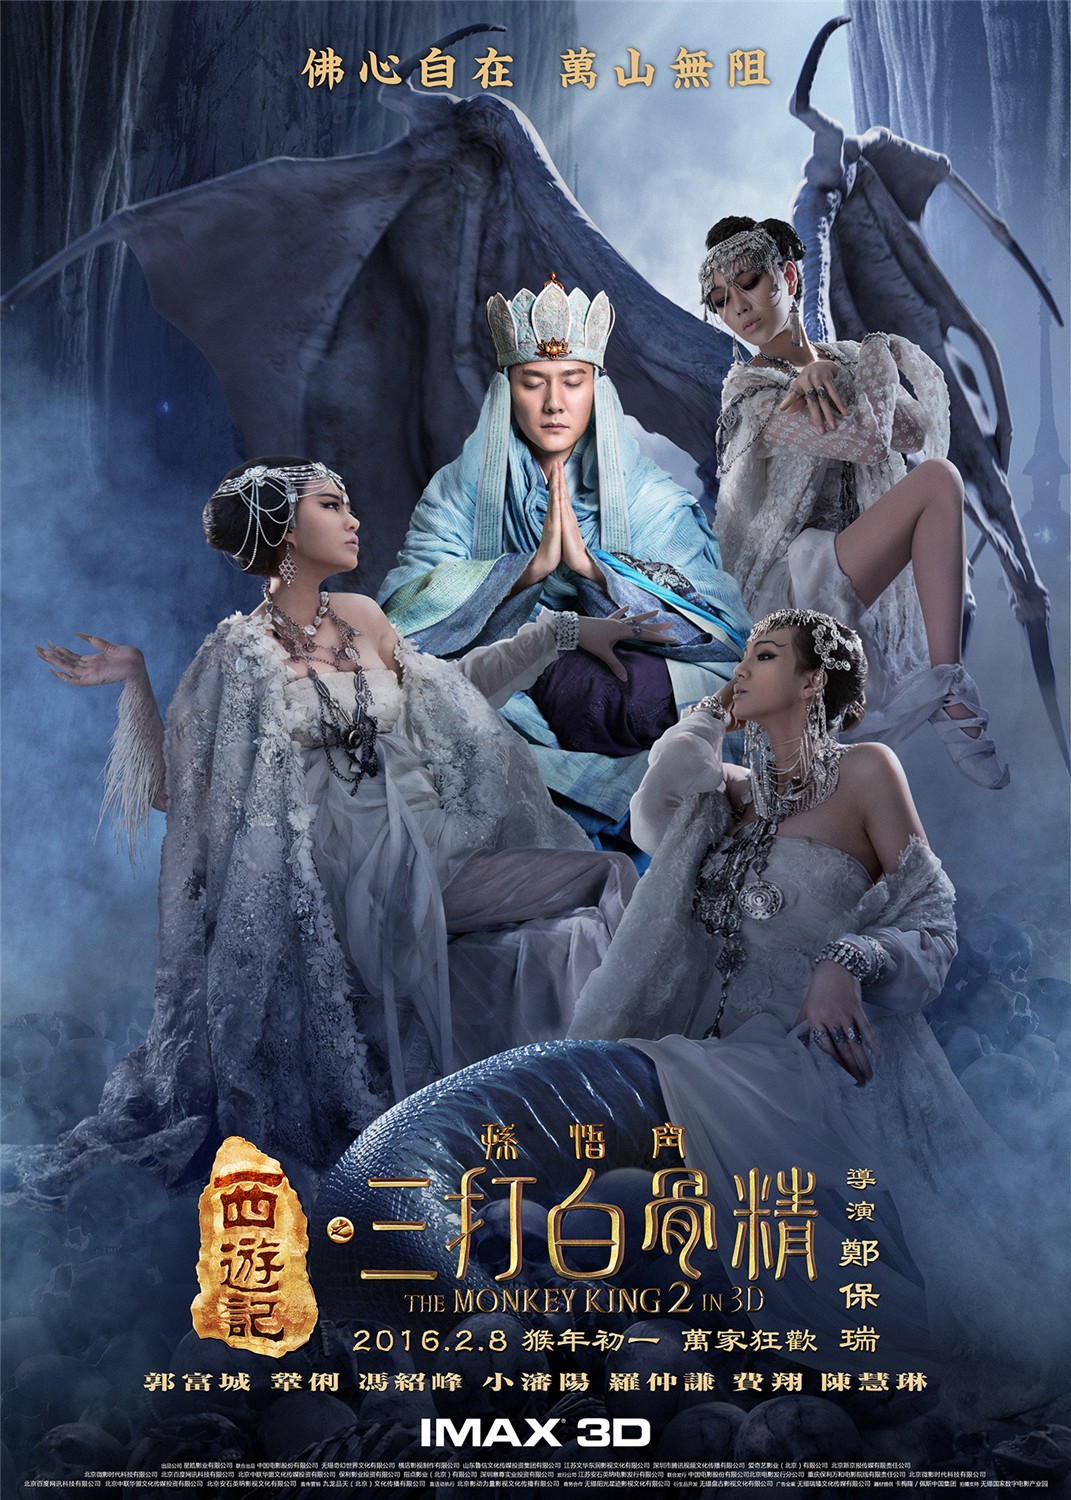 the monkey king 2 full movie download